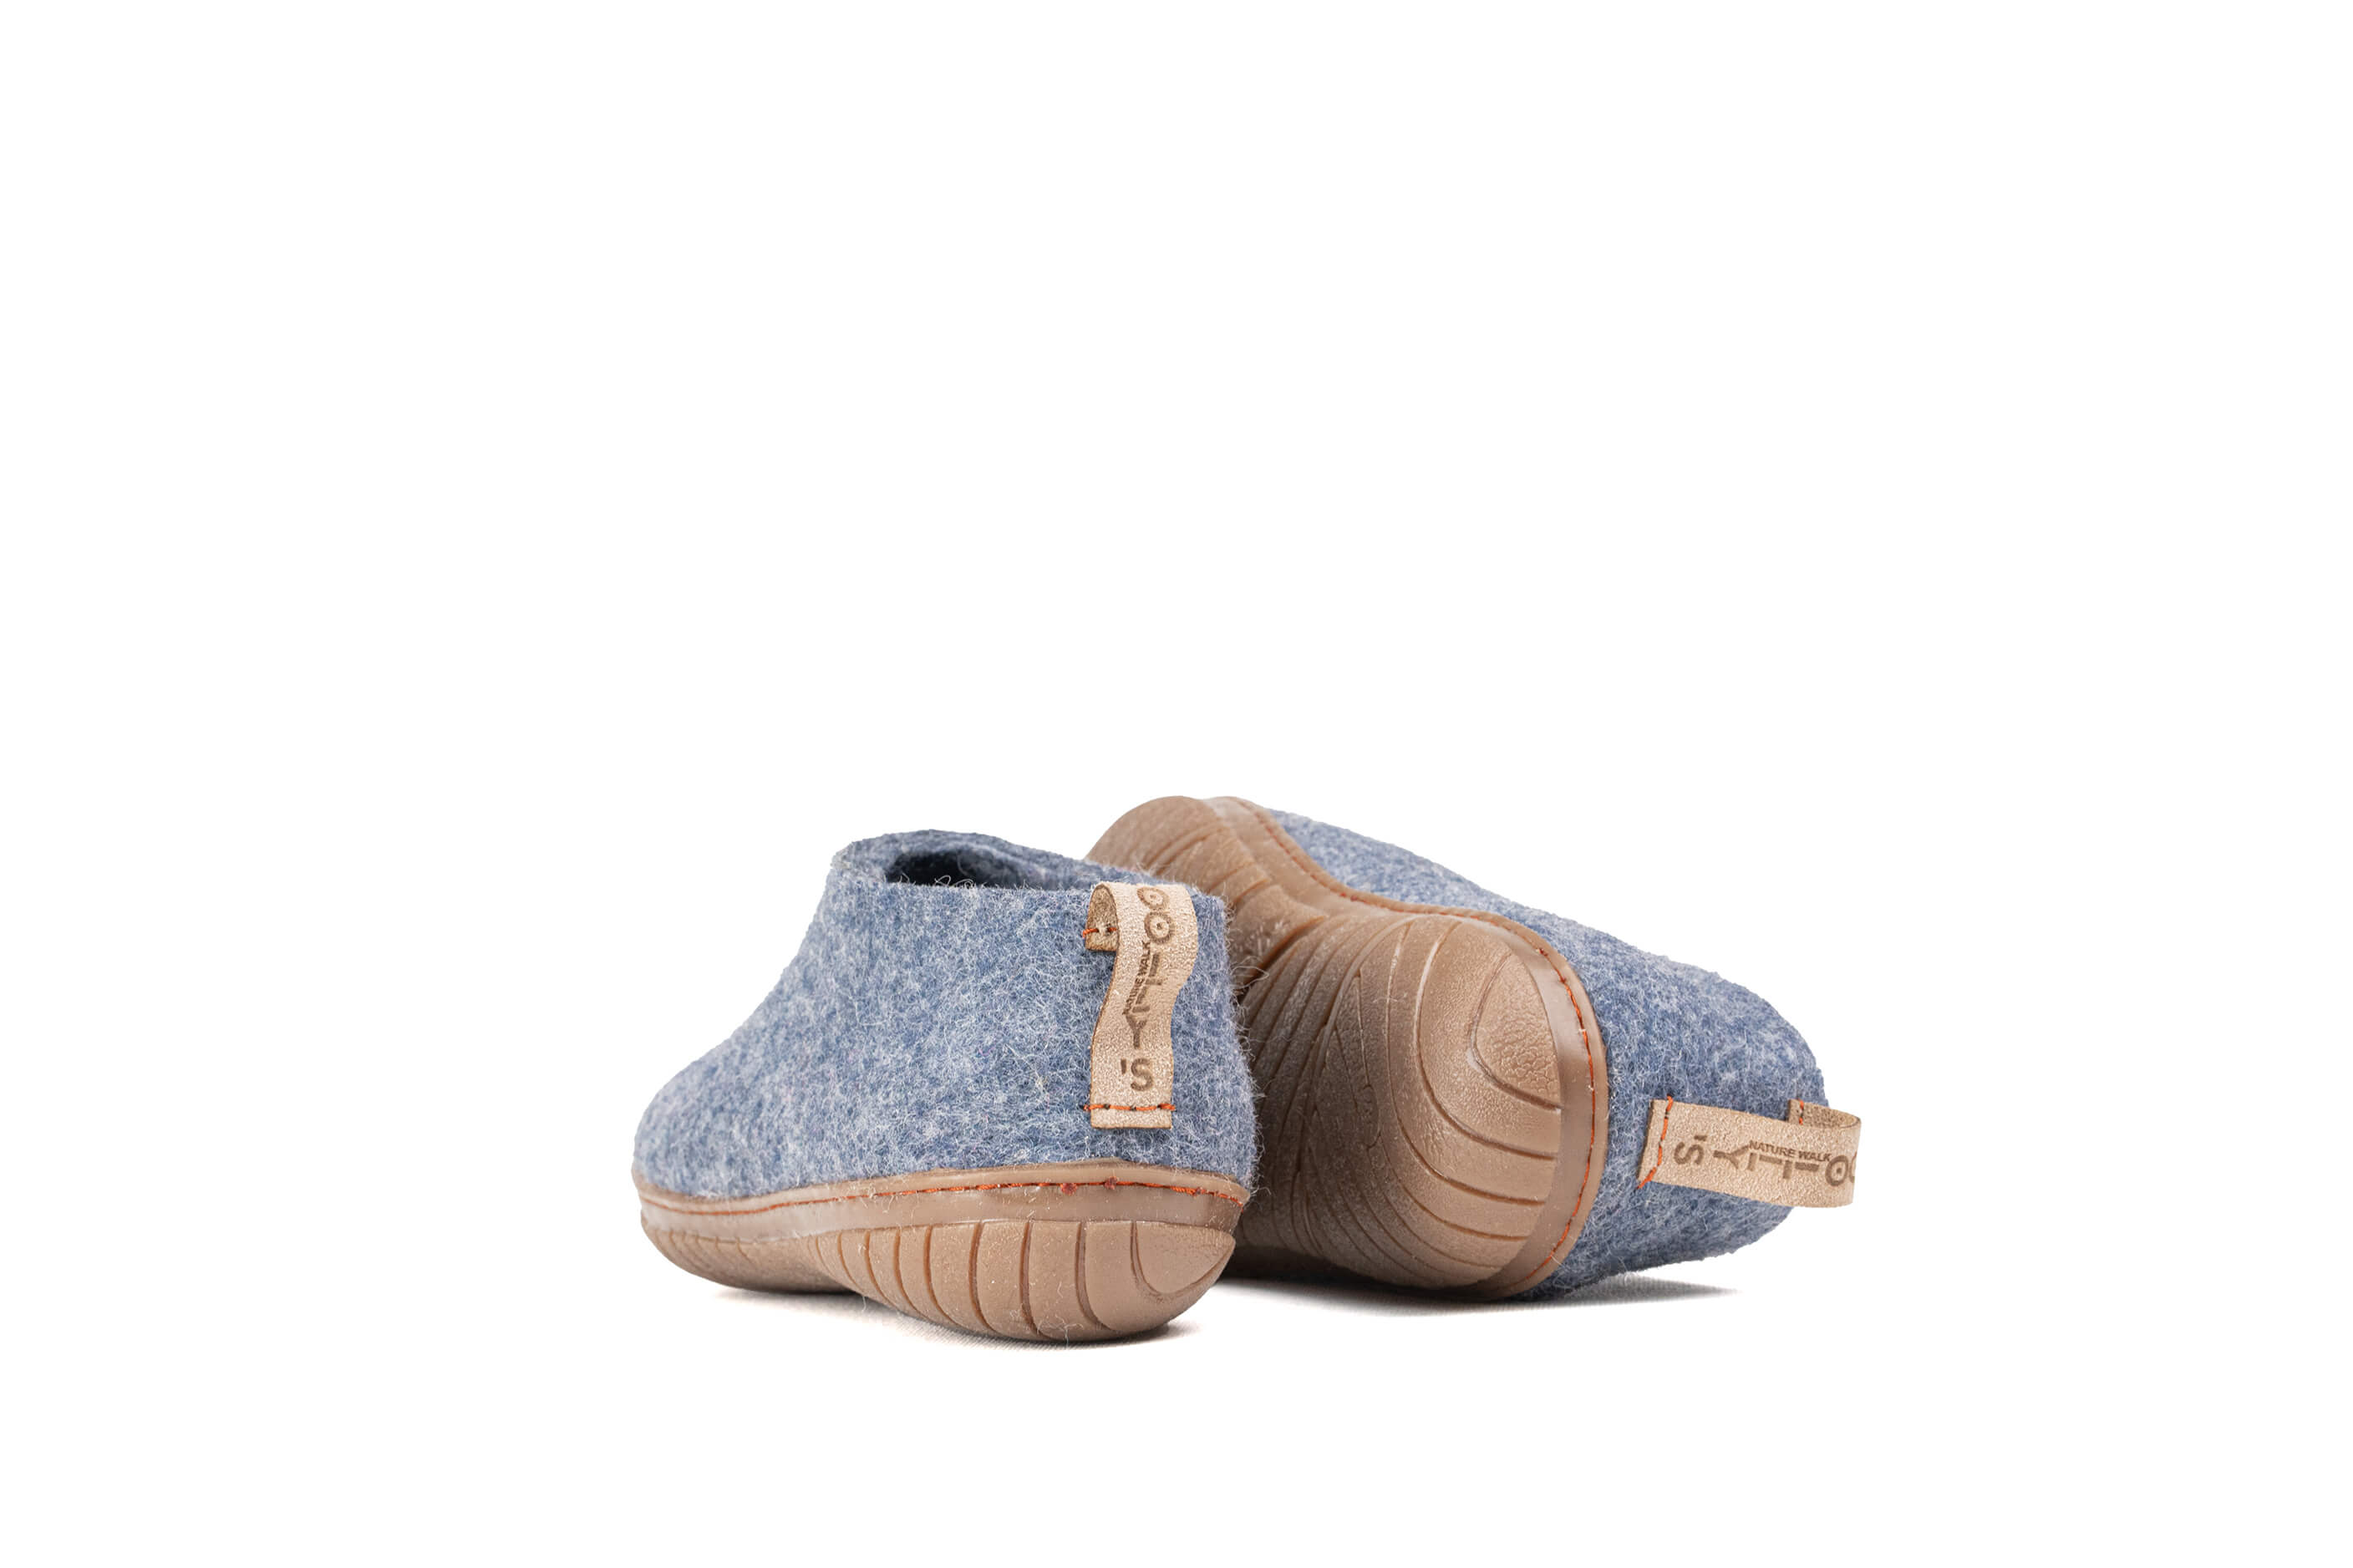 Outdoor Felt Shoes With Rubber Sole - Denim